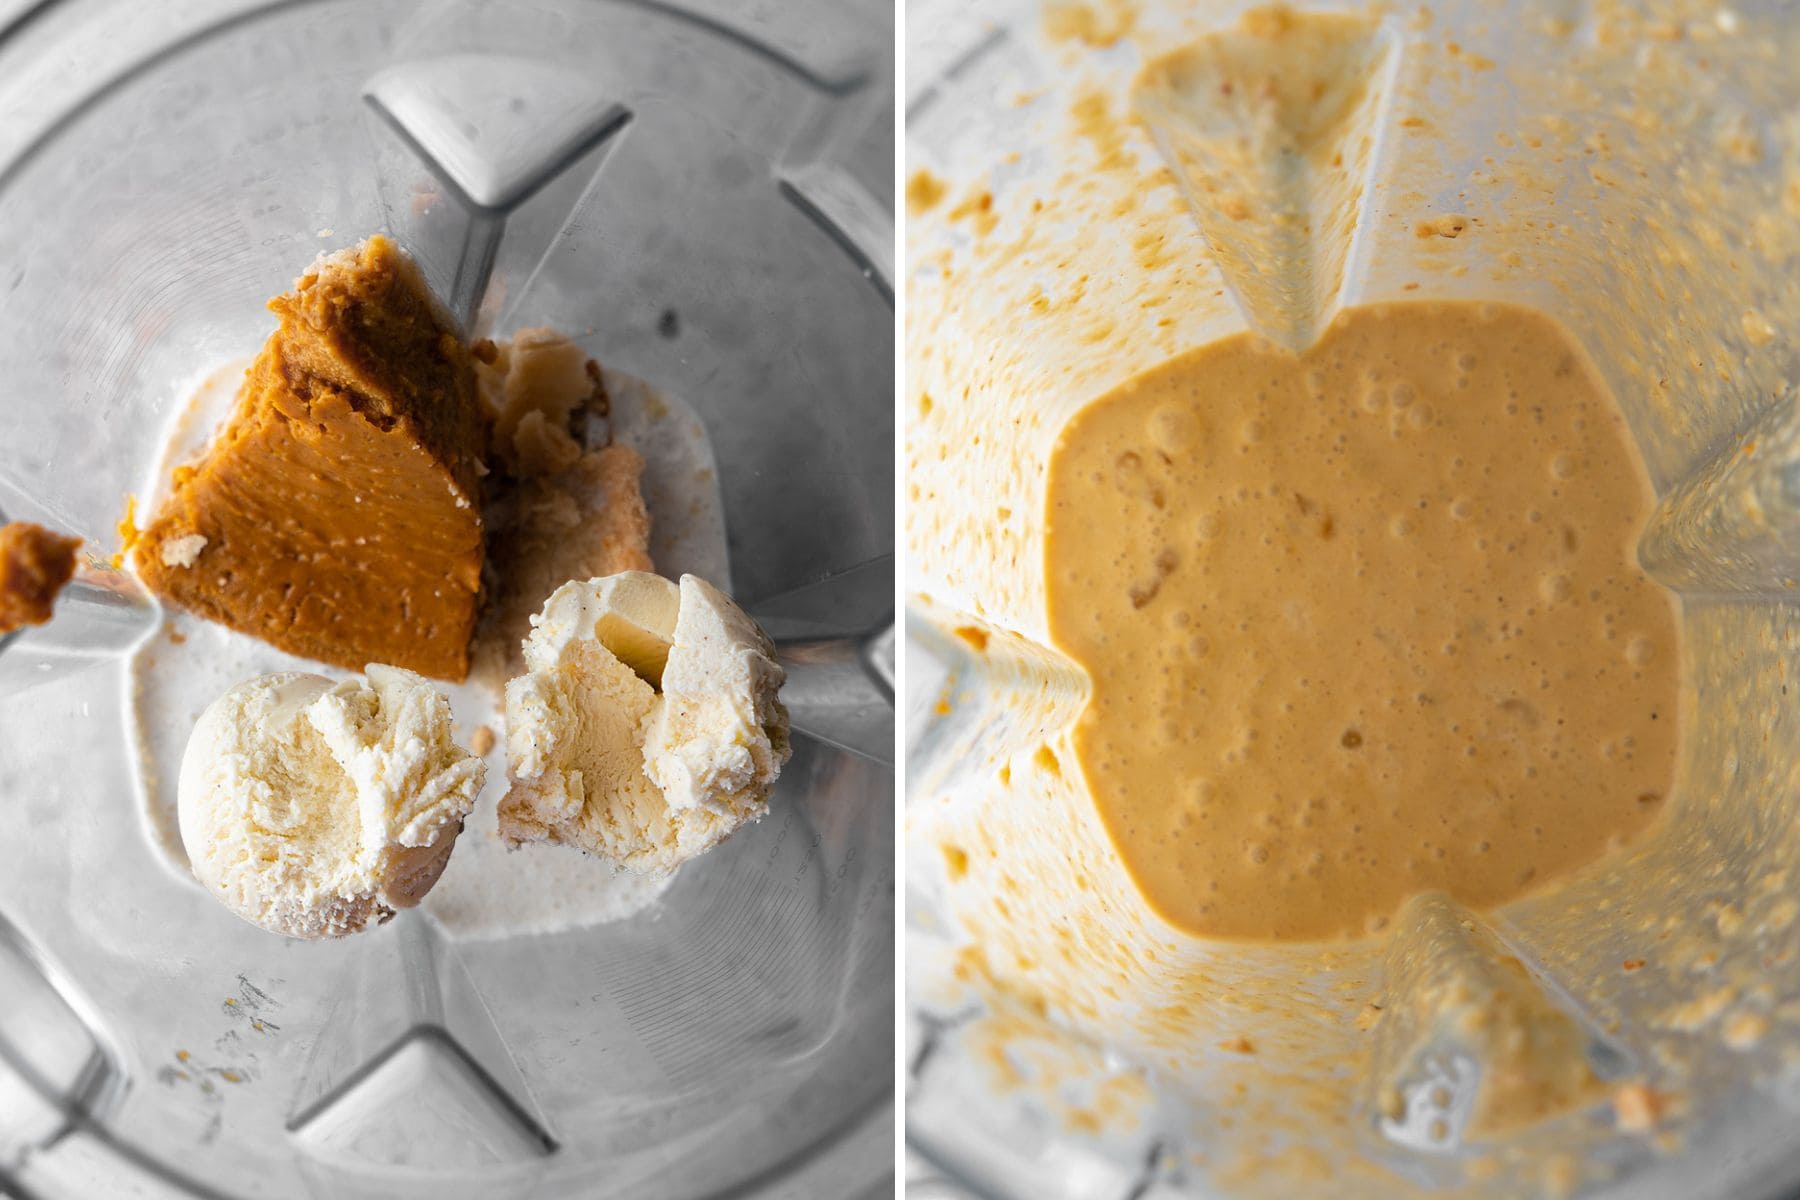 pumpkin pie with ice cream in a blender and the milkshake blended collage.